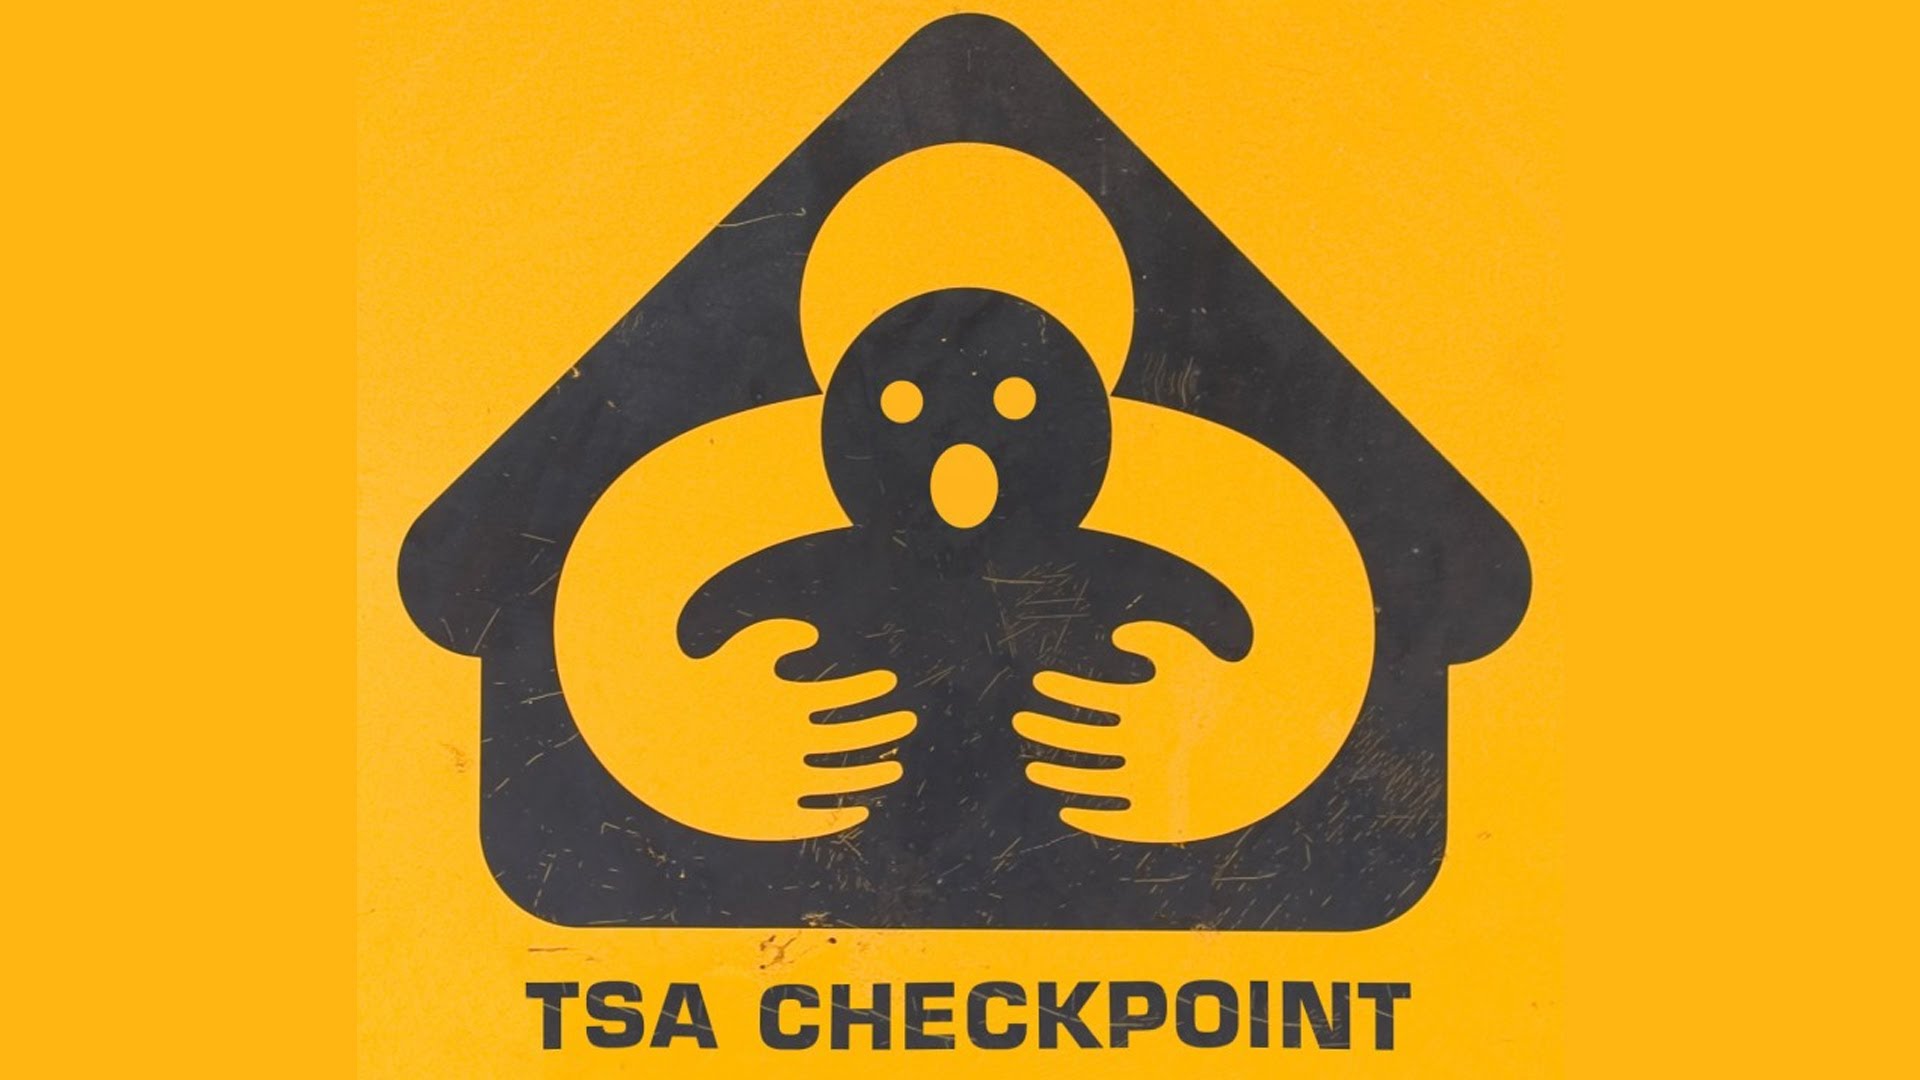 TSA Now Requires Passengers To Power On Devices, Or Risk Being Left Behind